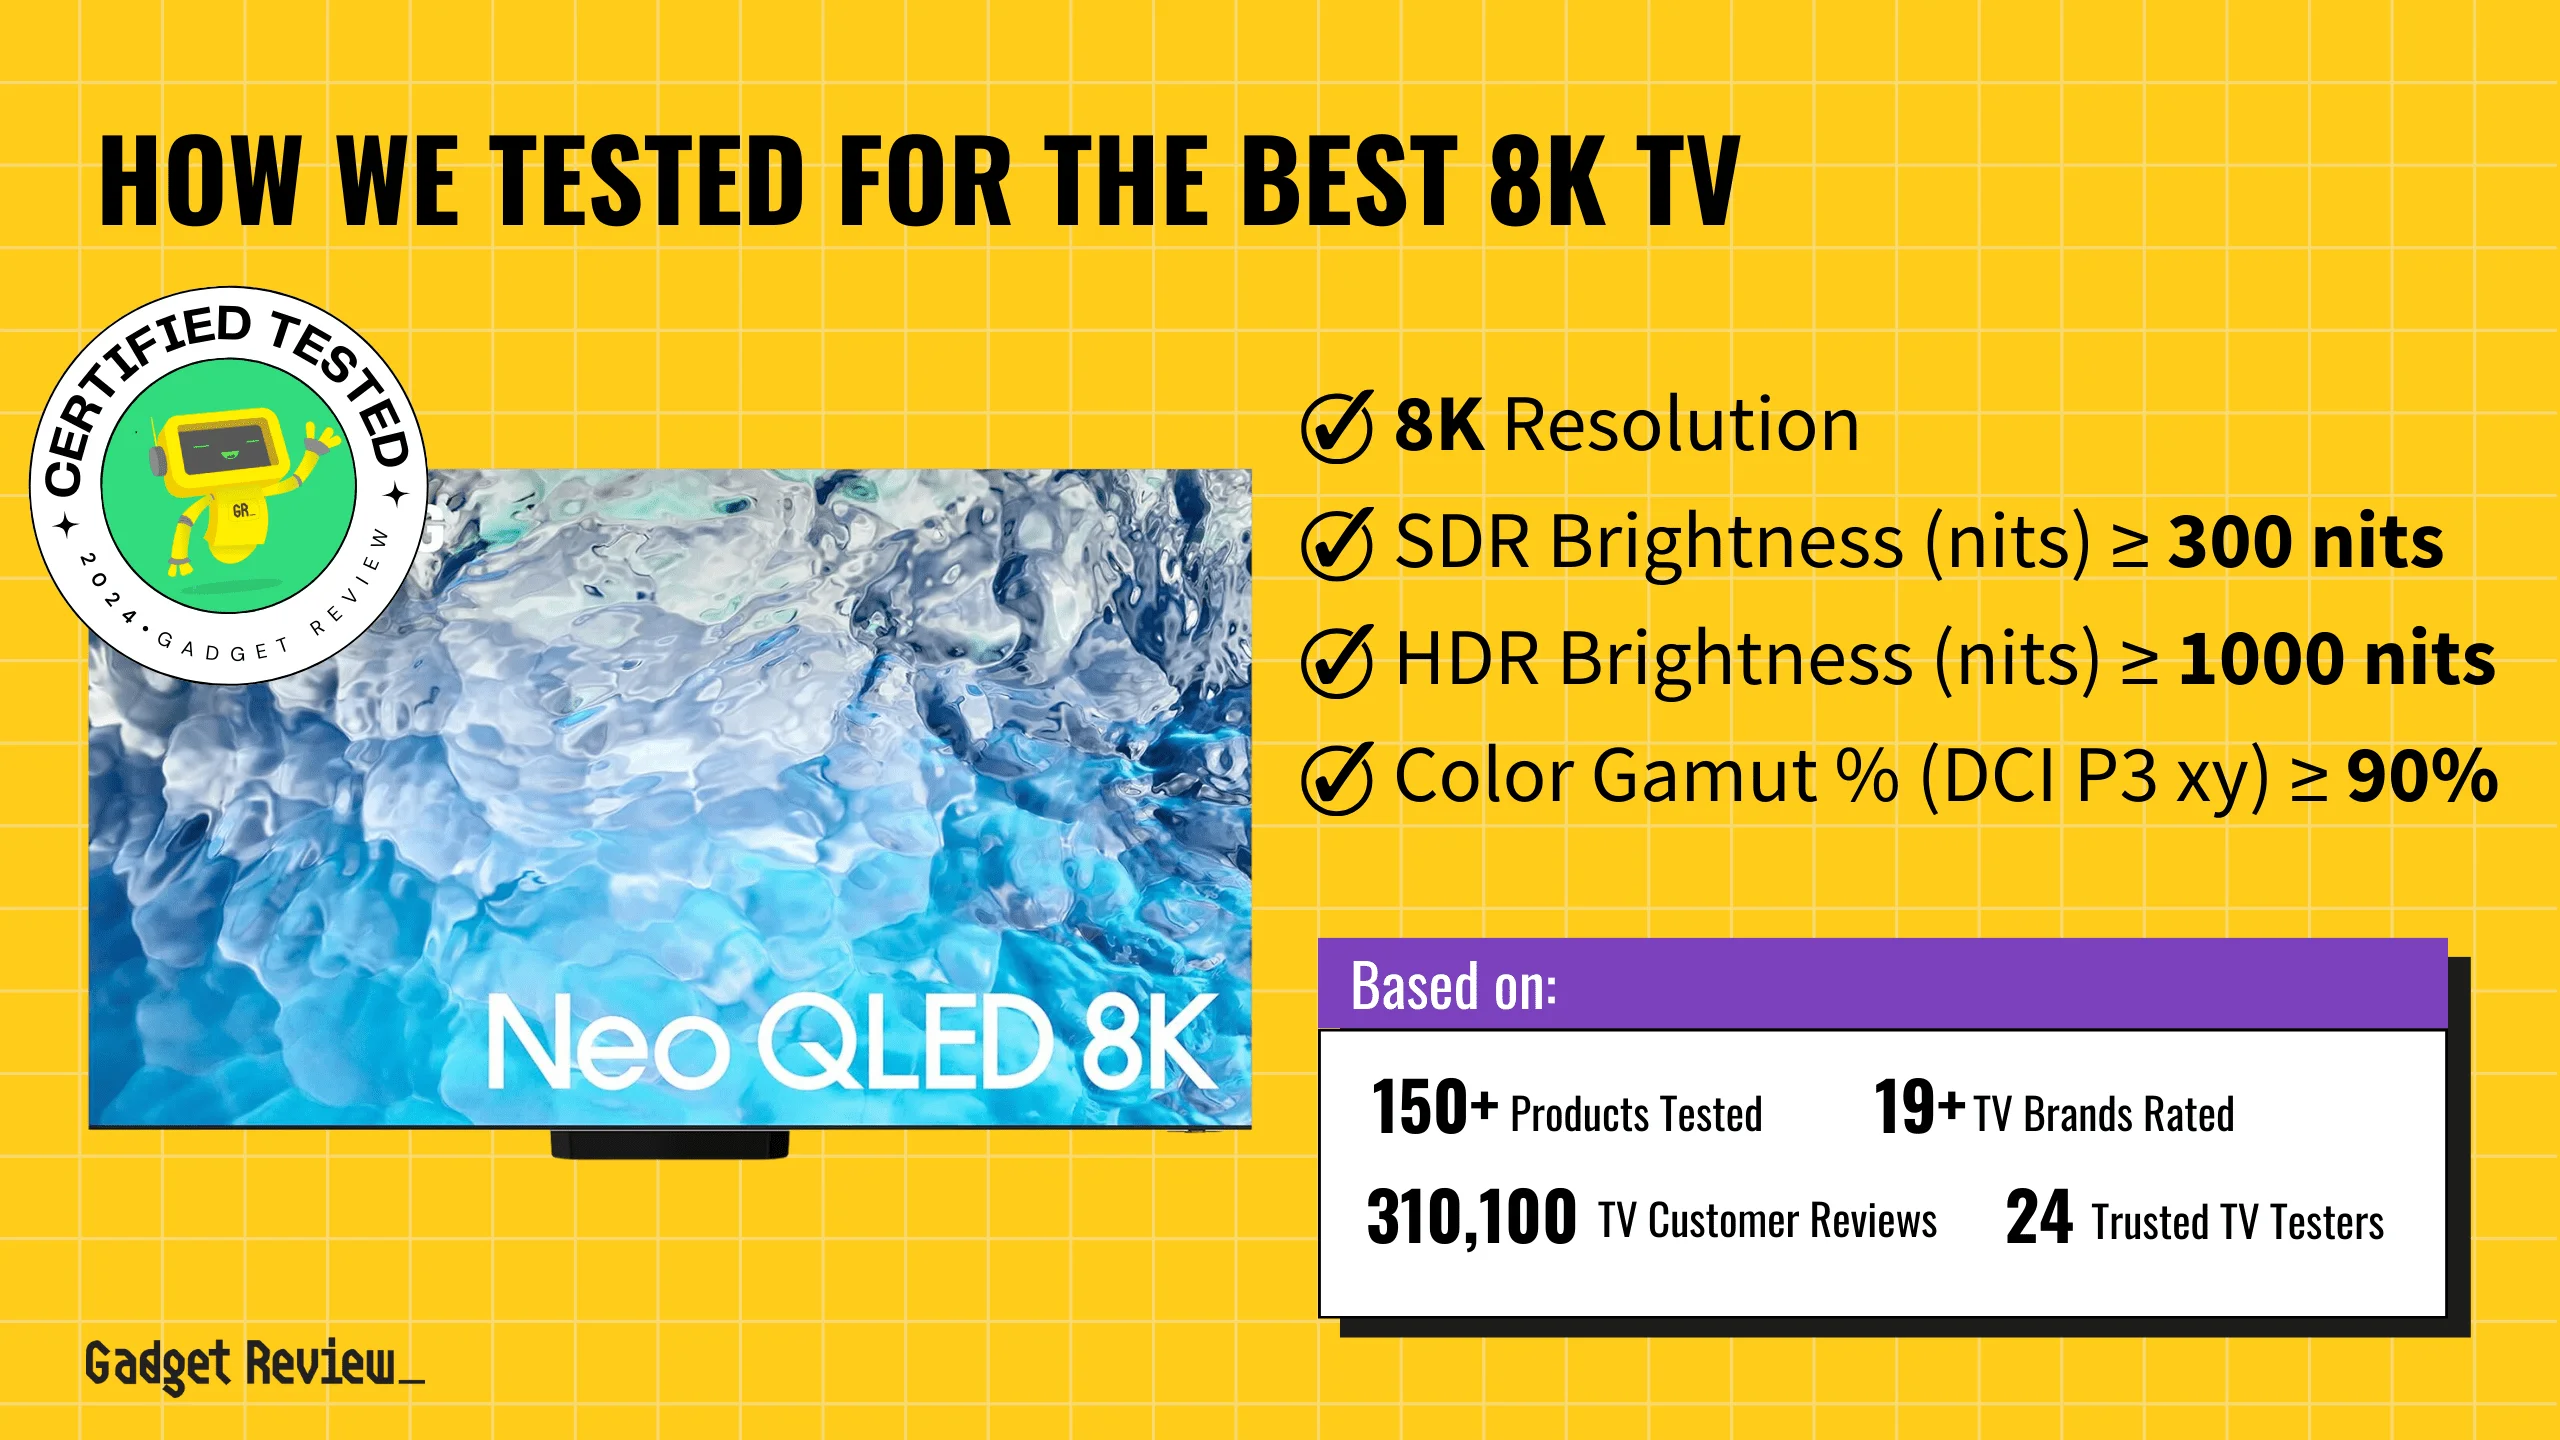 What are the Top 5 8K TVs?